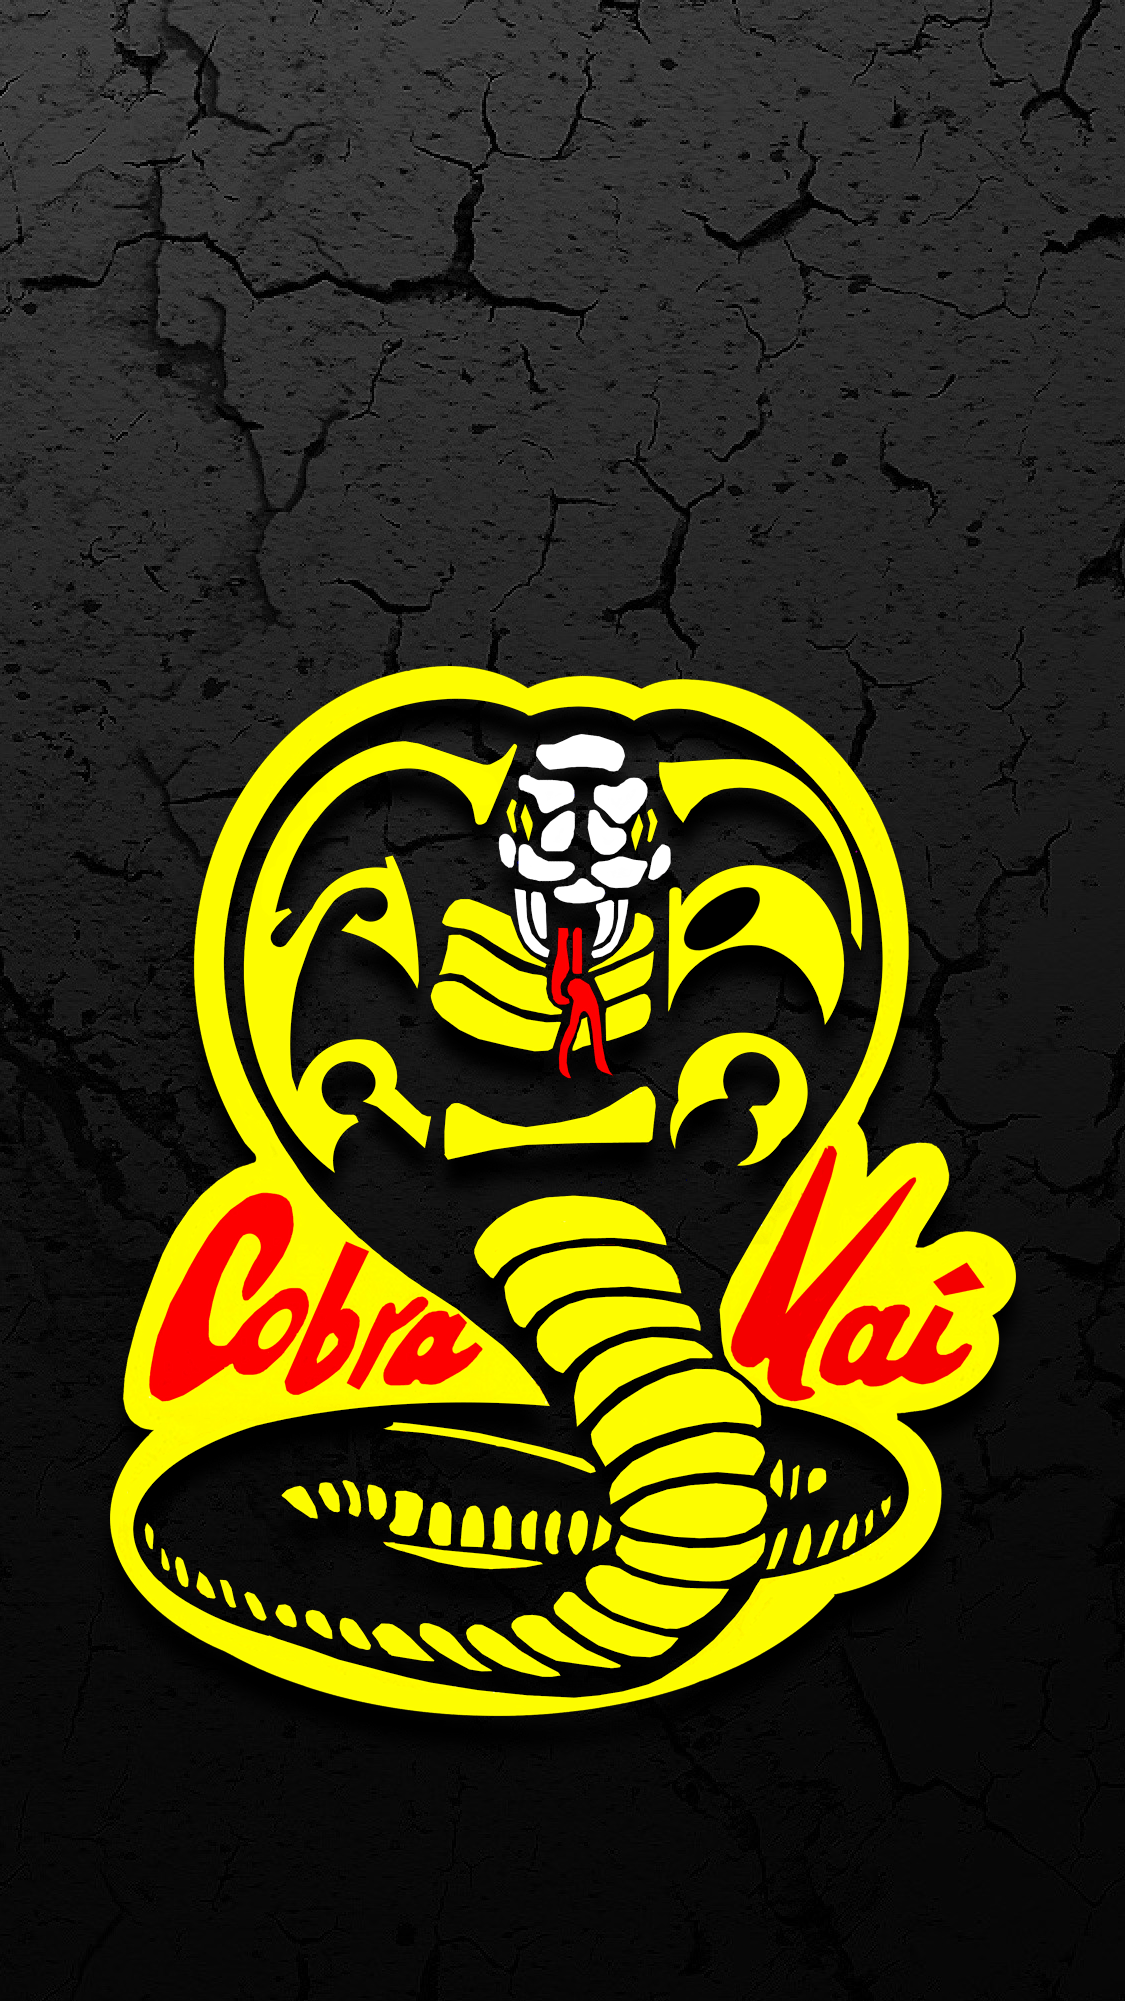 Couple of Cobra Kai phone wallpapers I made quickly.